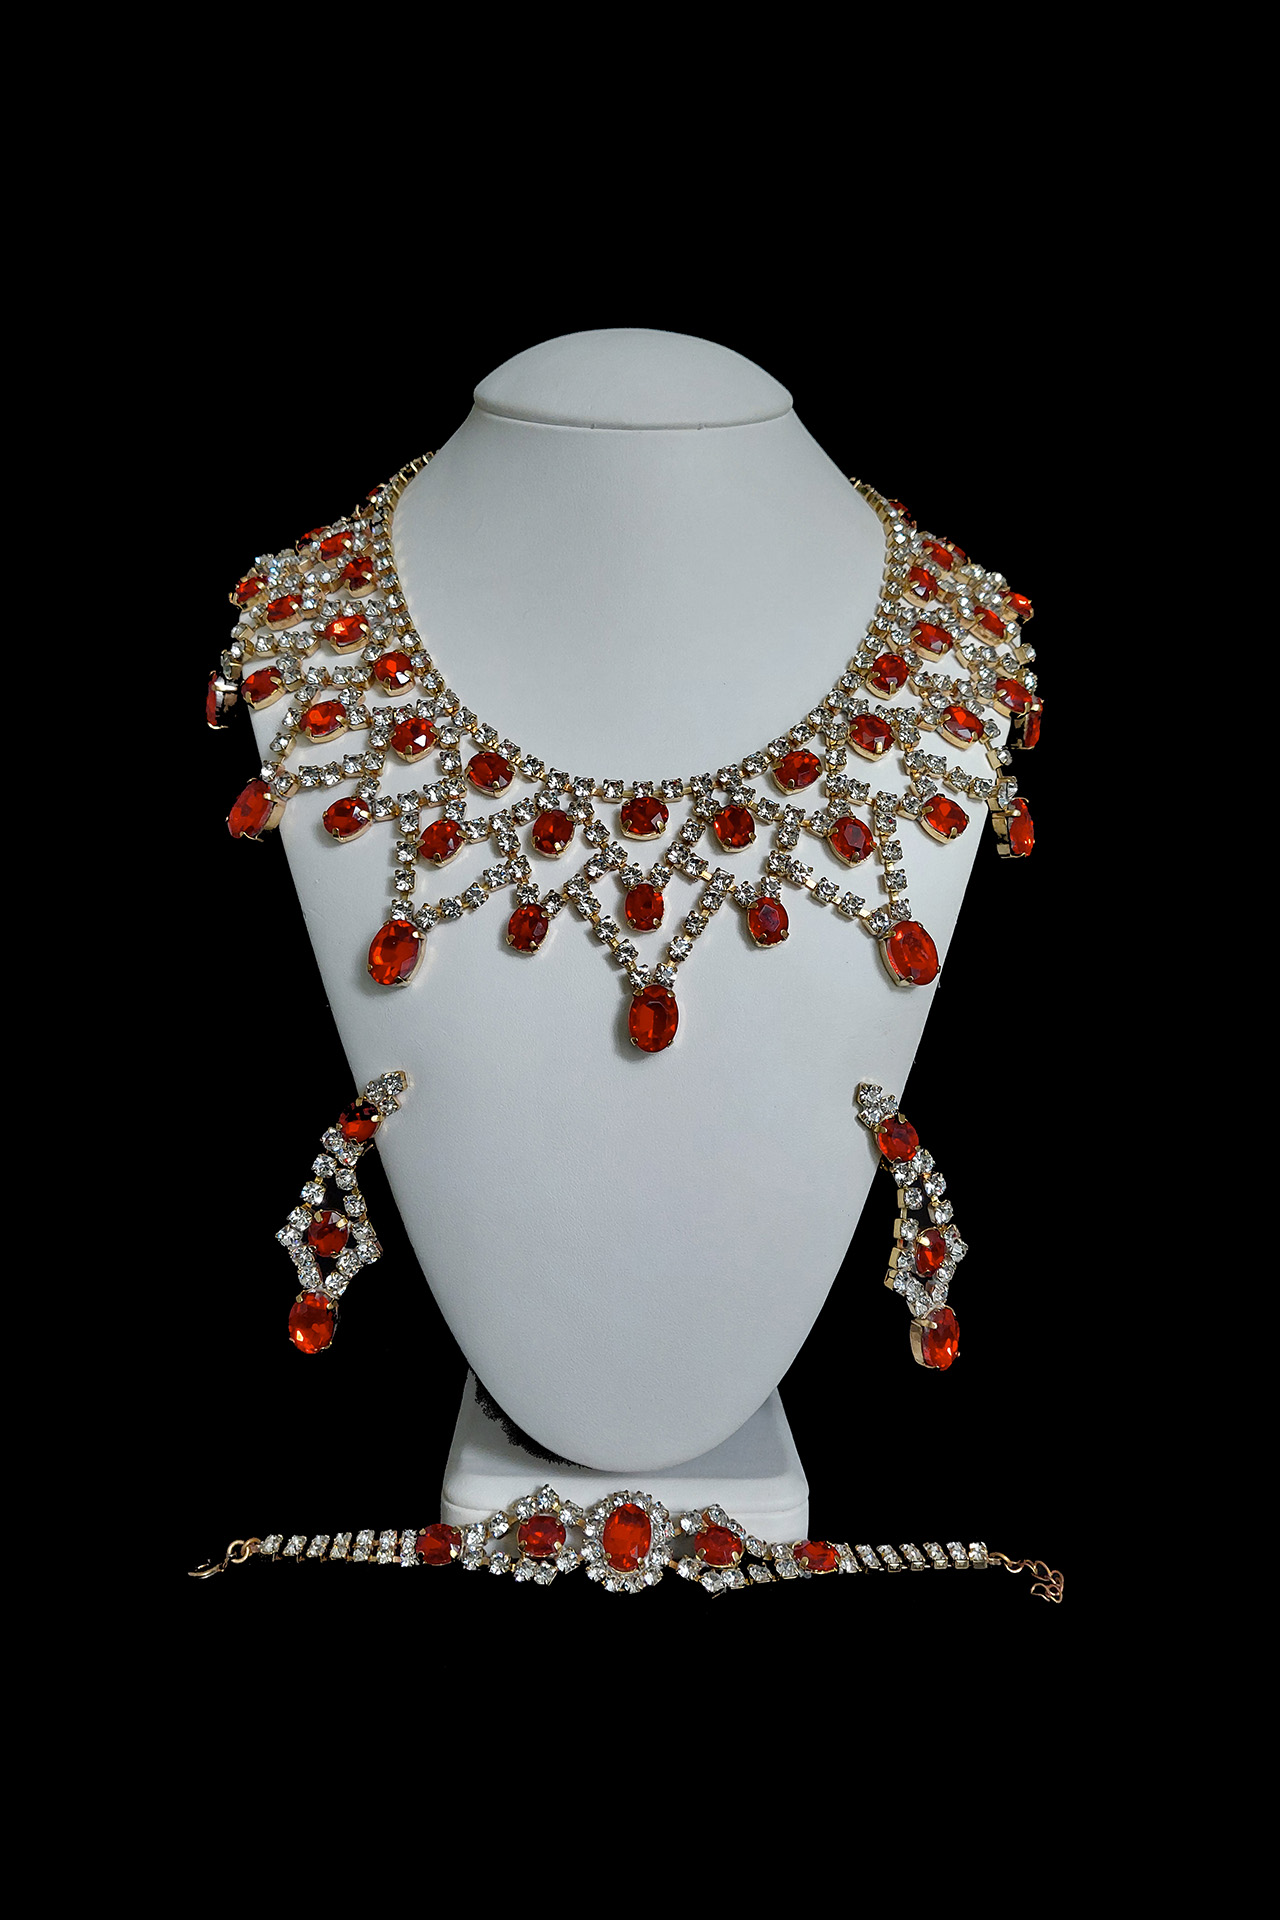 Red luxury designer necklace, bracelet and earrings